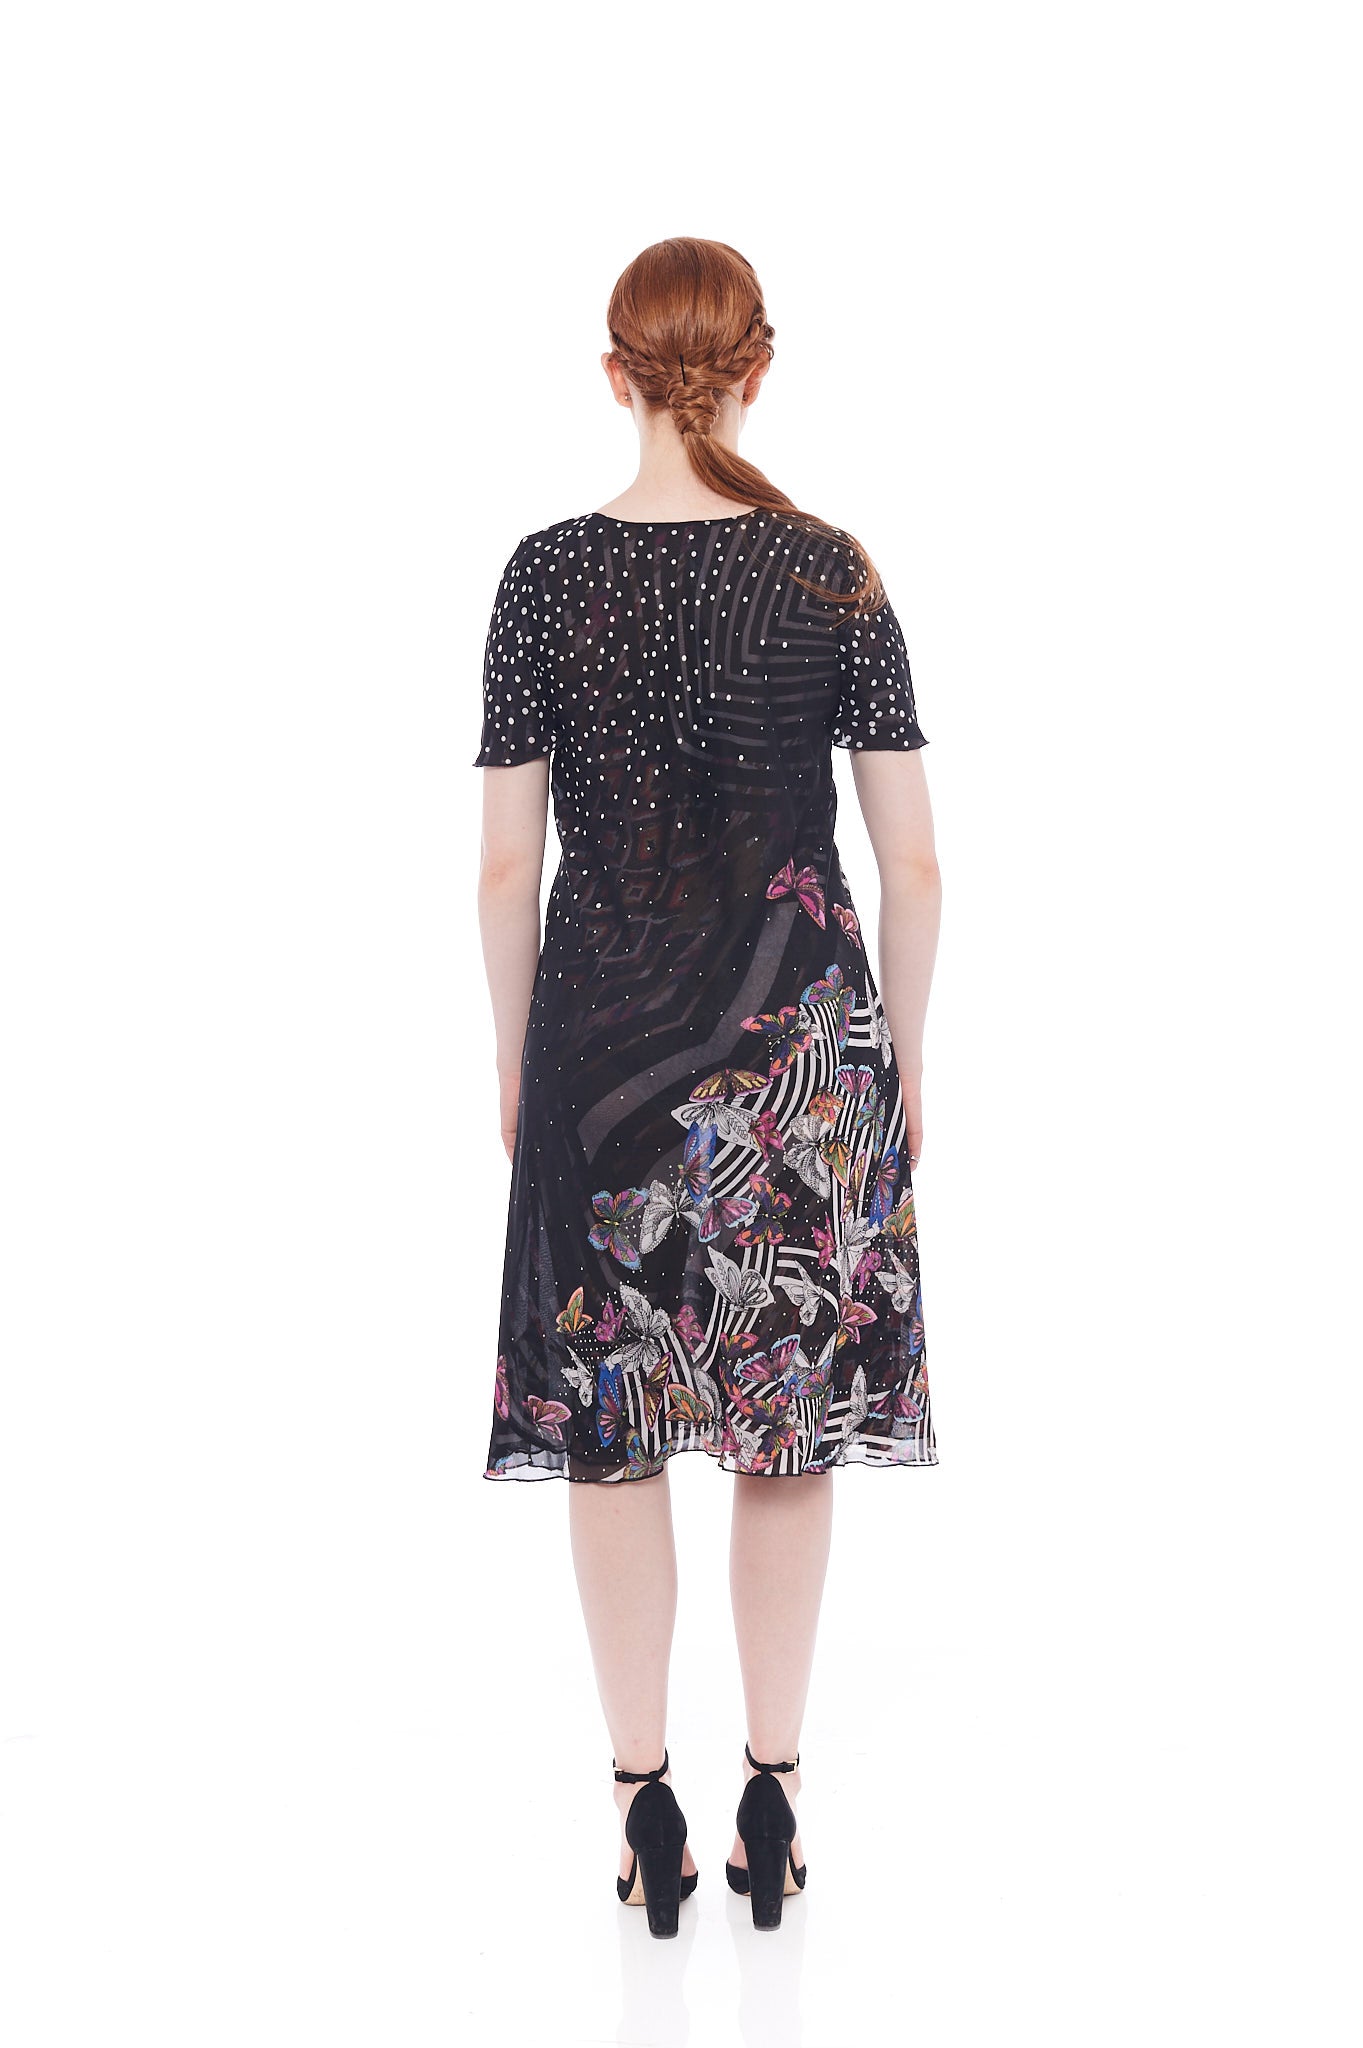 THE BUTTERFLY SHIMMERY REVERSIBLE DRESS